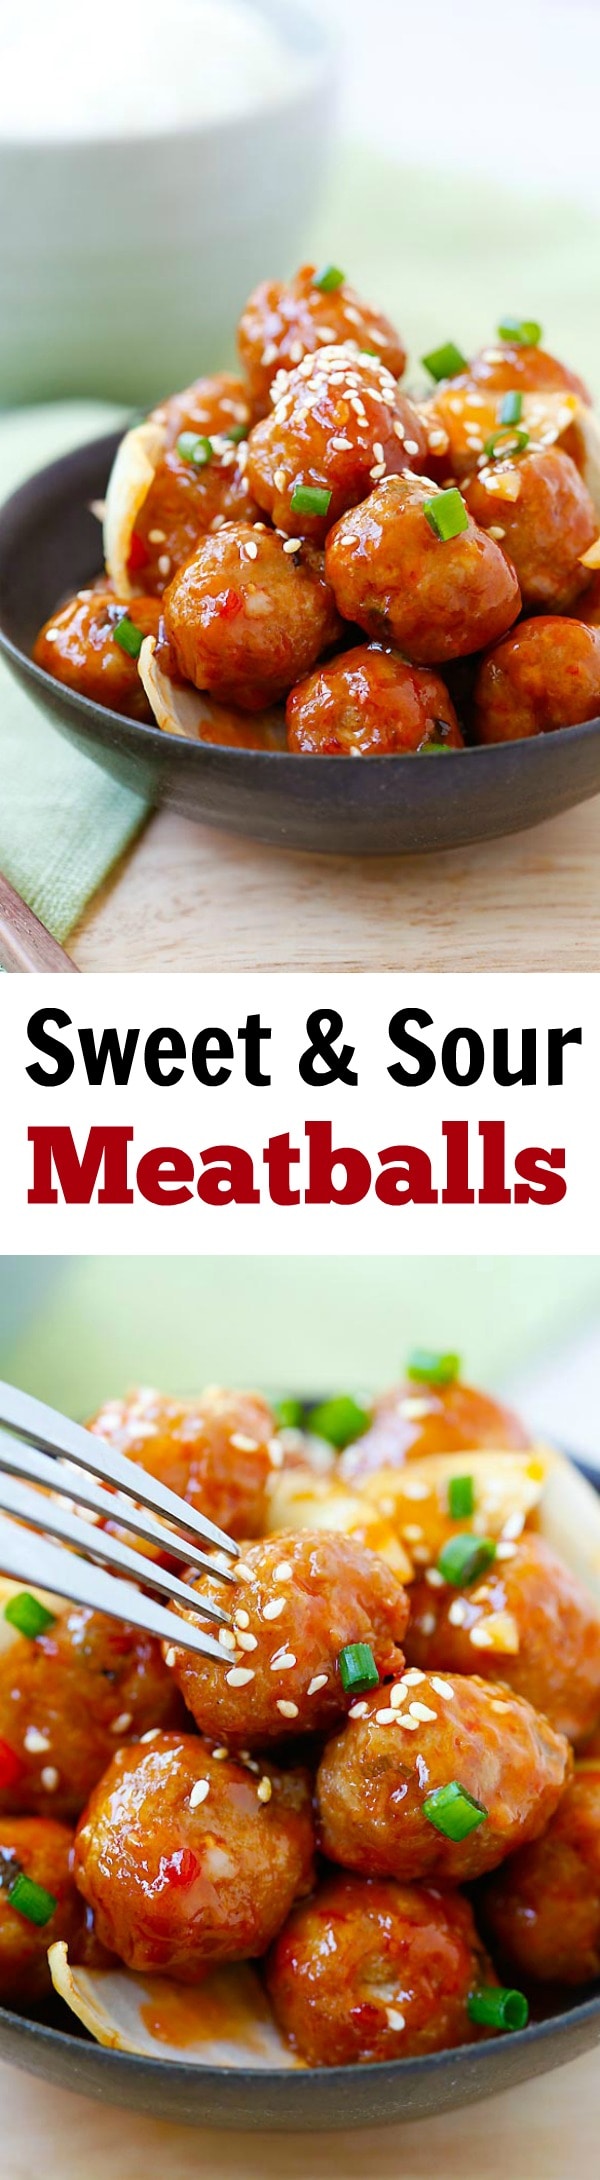 Sweet and Sour Meatballs - the best meatballs ever with sweet and sour sauce. These meatballs are so good you'll want them everyday! | rasamalaysia.com